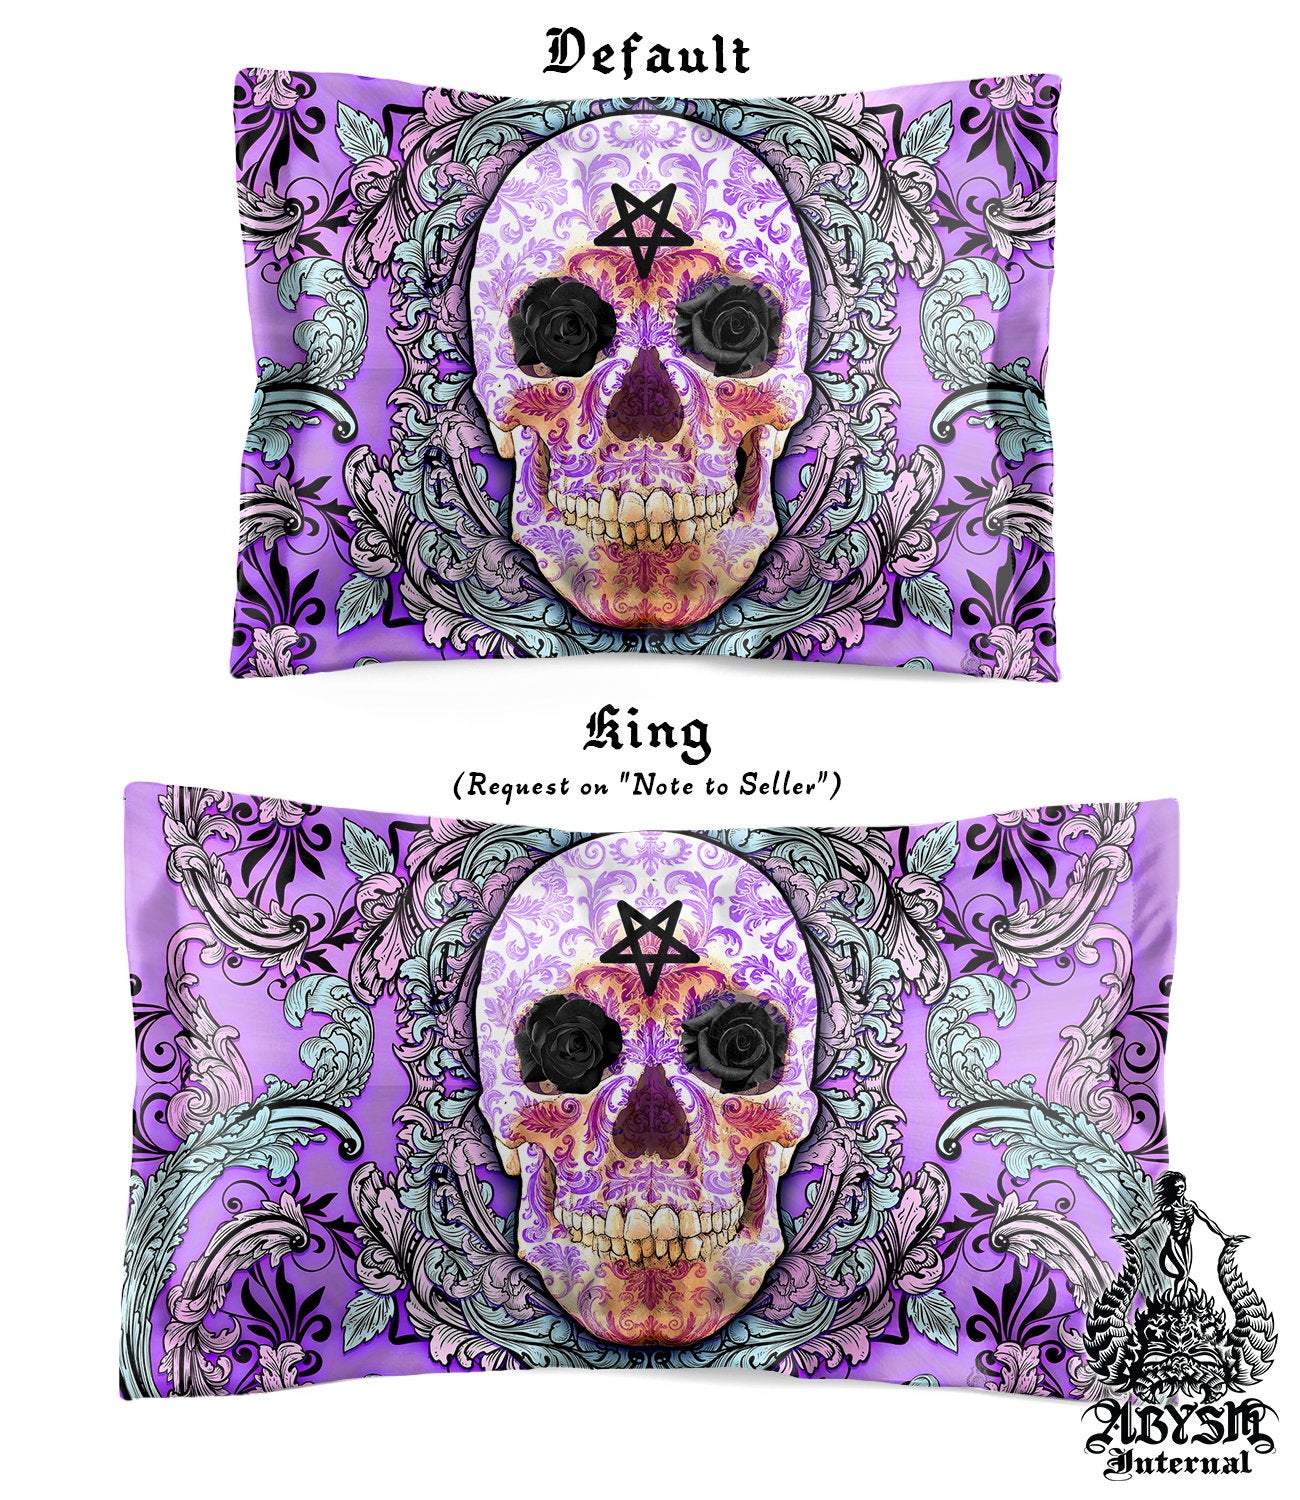 Pastel Goth Bedding Set, Comforter and Duvet, Purple Skull Bed Cover and Bedroom Decor, King, Queen and Twin Size - Black Roses - Abysm Internal